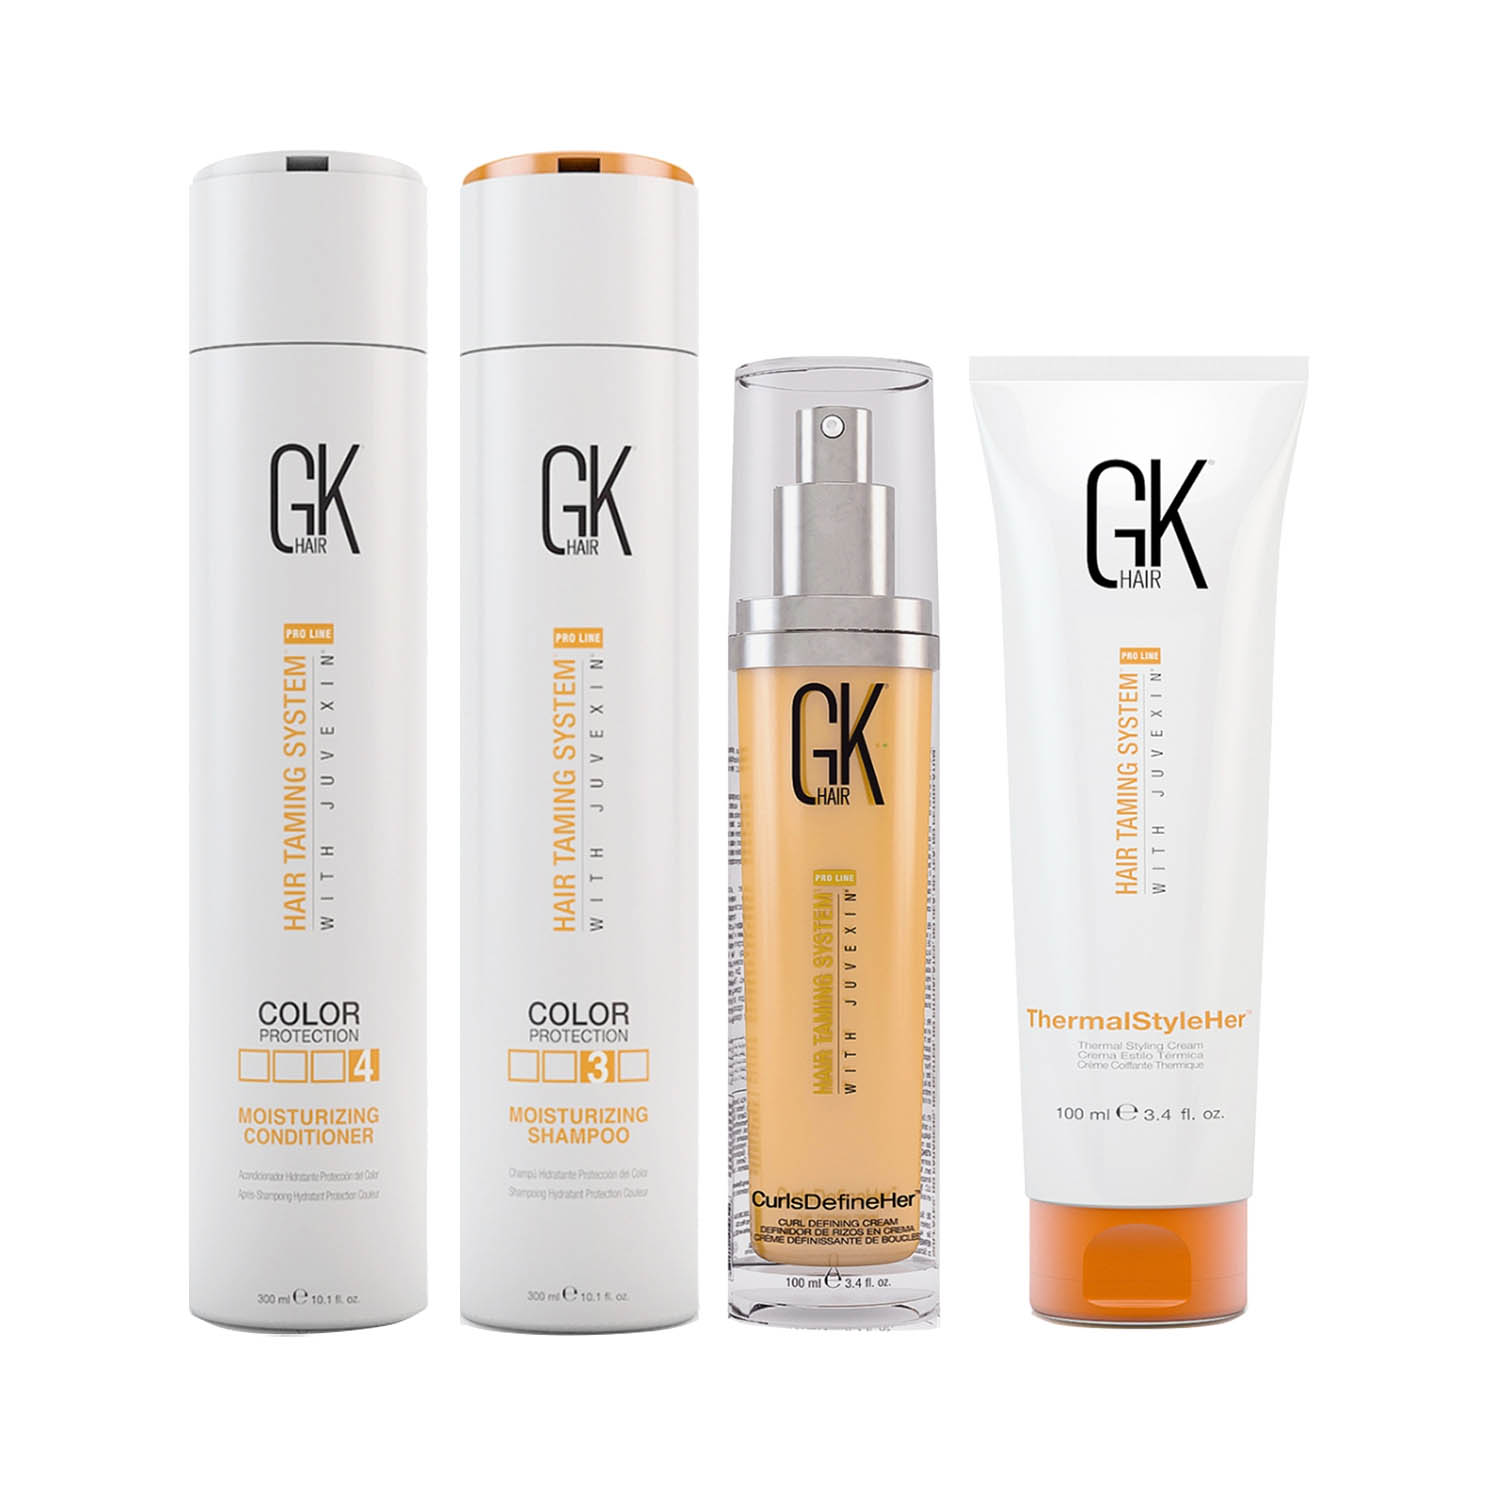 GK Hair | GK Hair Moisturizing Shampoo and Conditioner(300 ml) with Curls Defineher,Thermal Styler Cream Combo